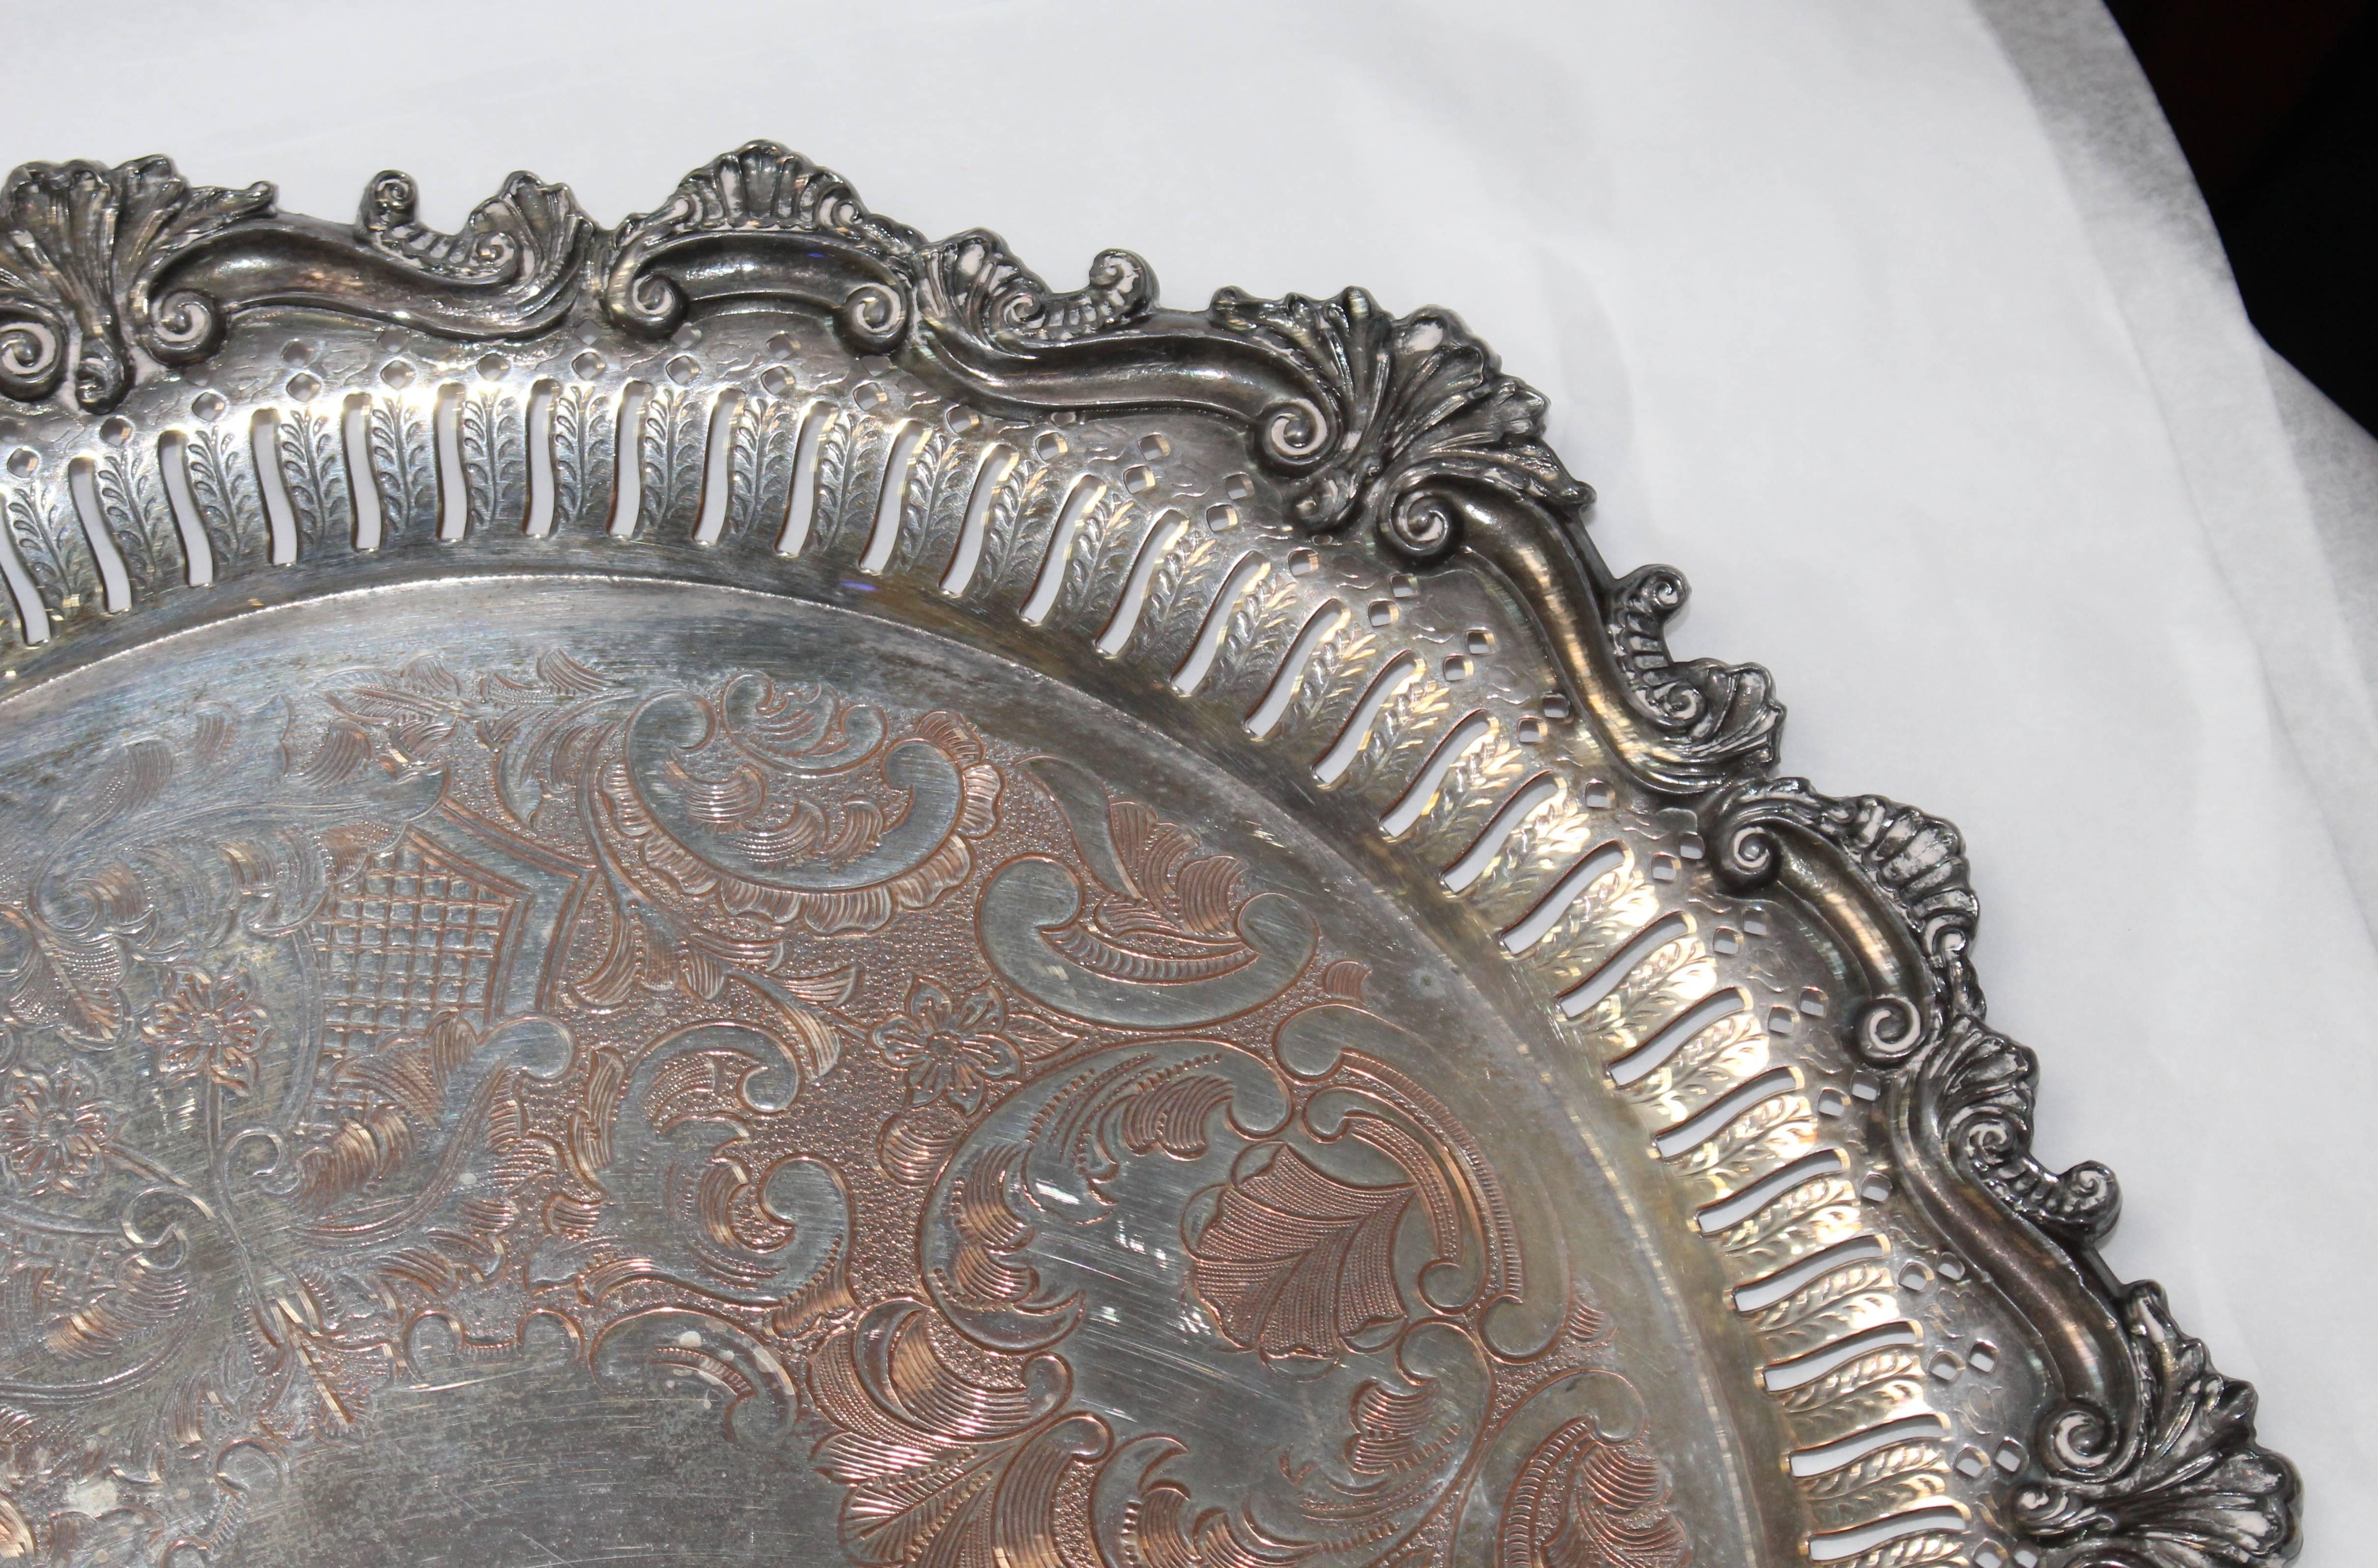 19th Century Heavy Ornate Engraved Antique Silver Plated on Copper Charger Tray